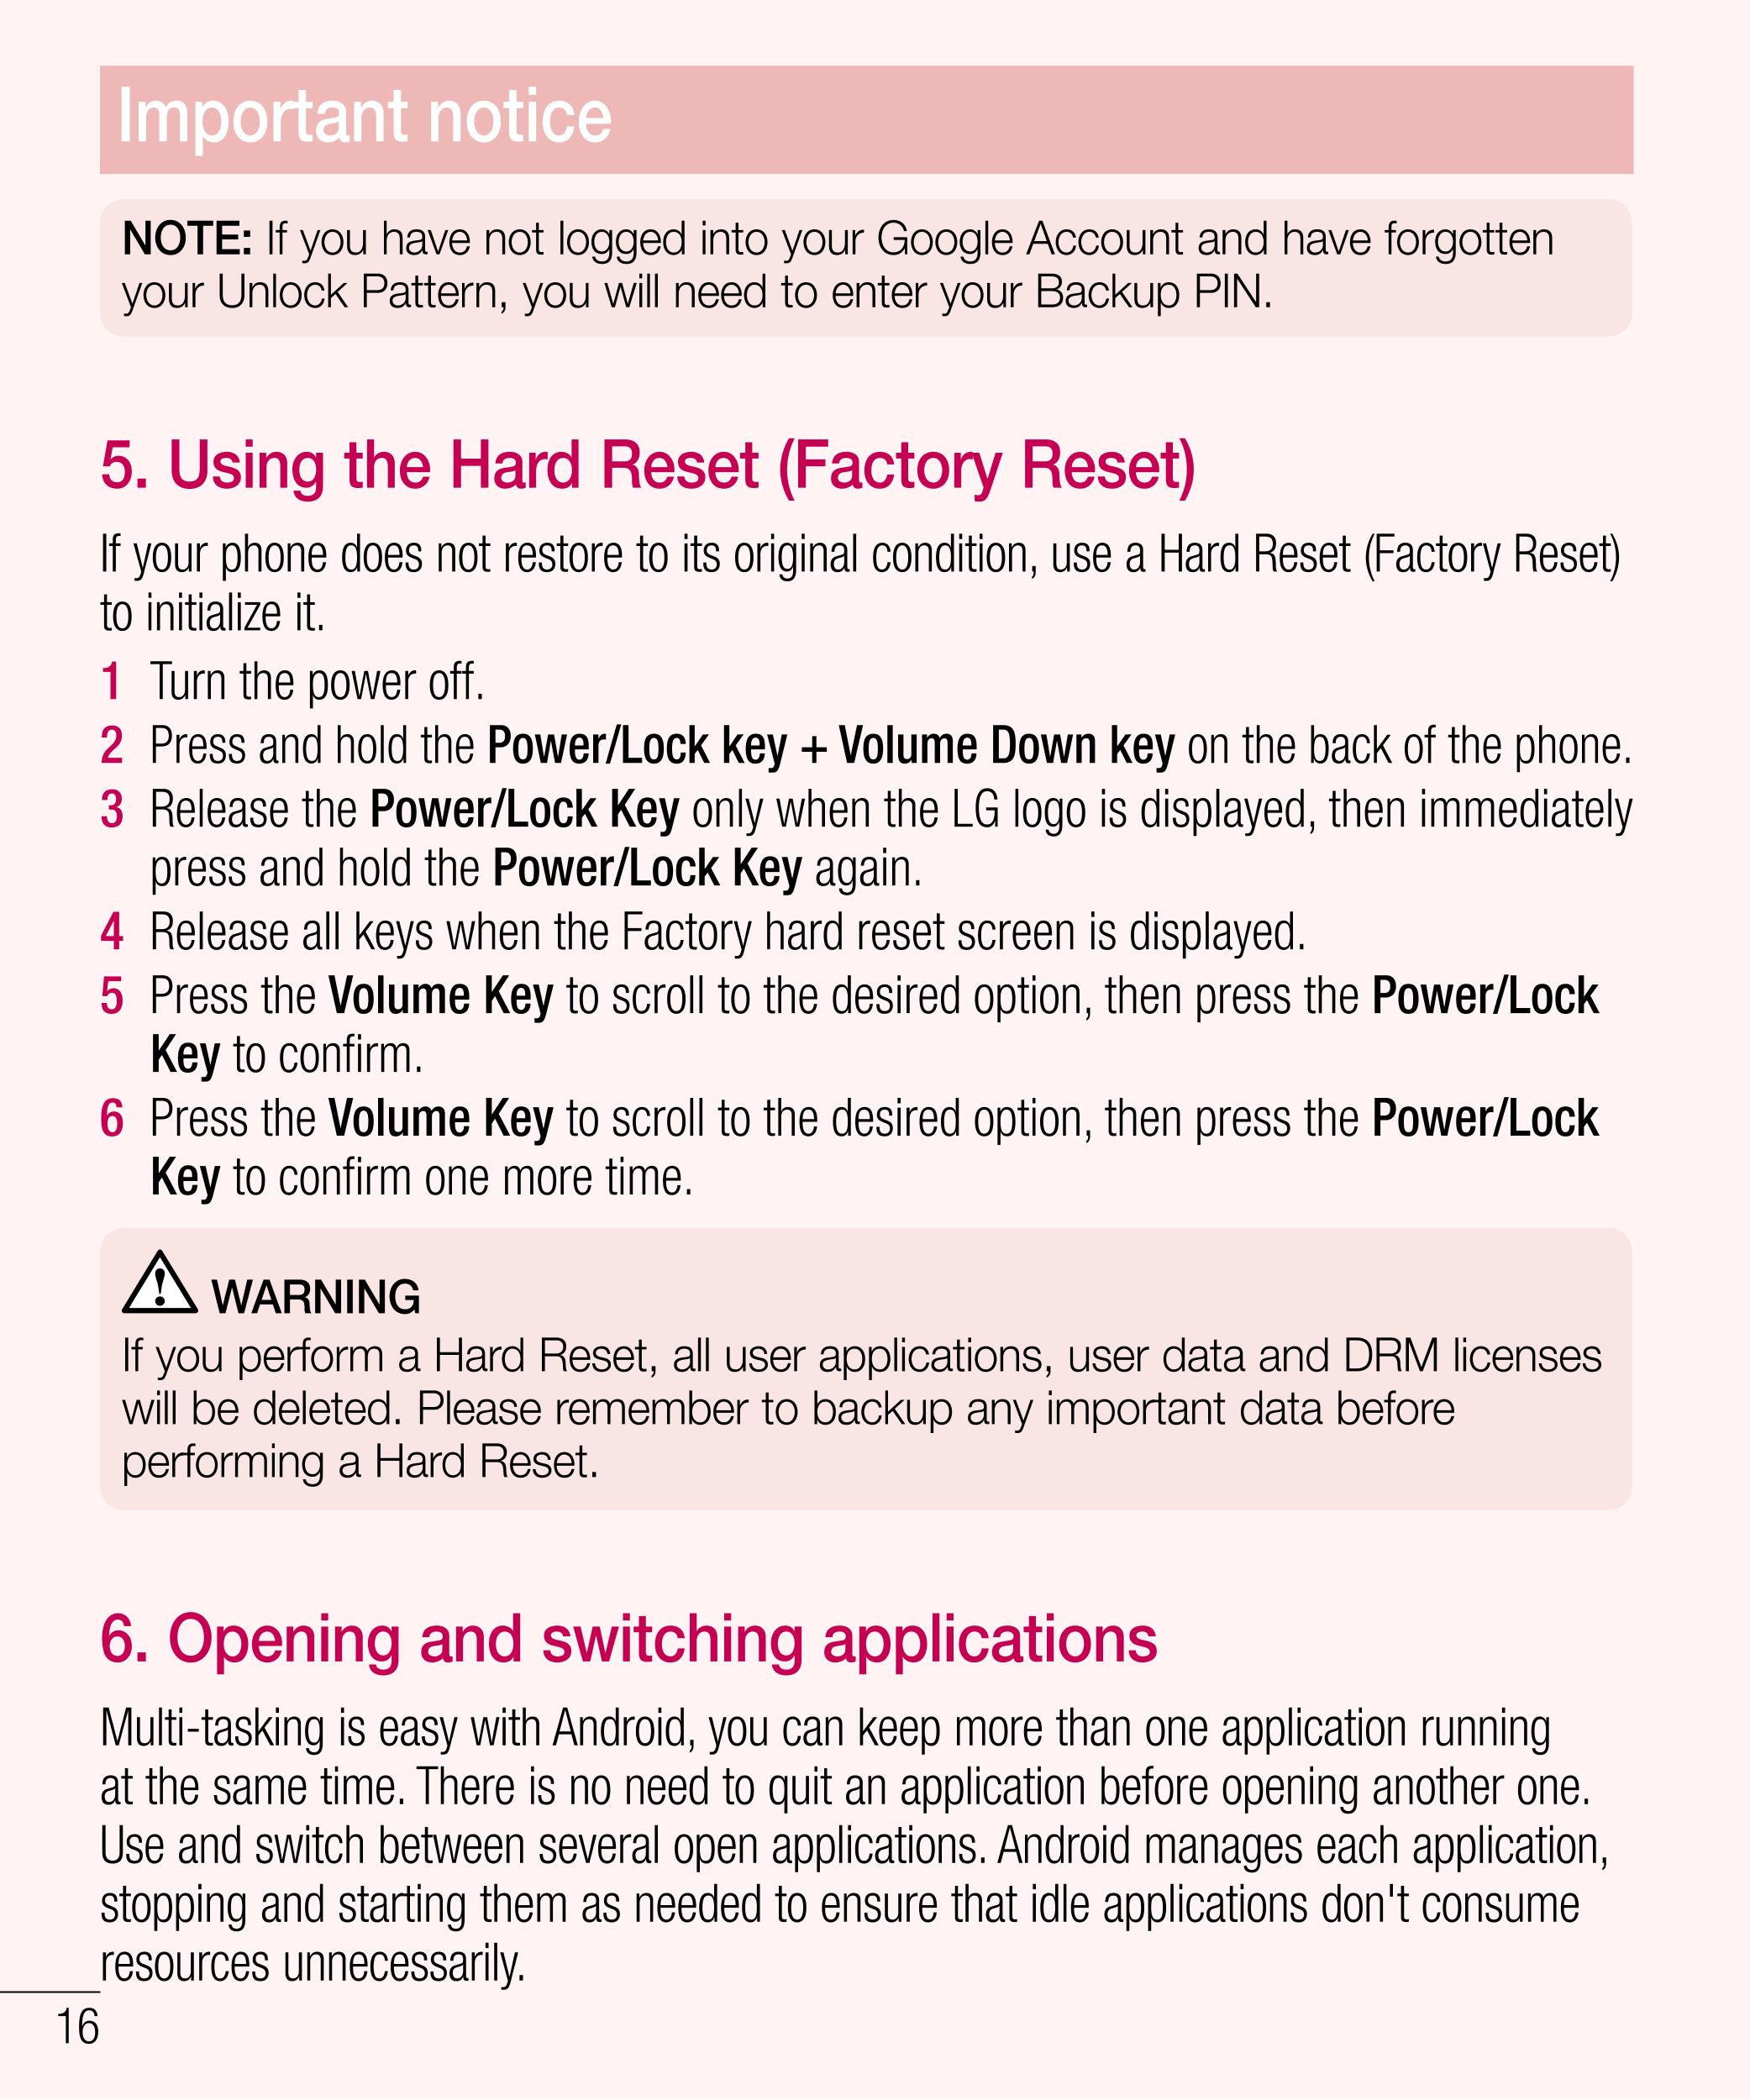 Important notice
NOTE: If you have not logged into your Google Account and have forgotten 
your Unlock Pattern, you will need to